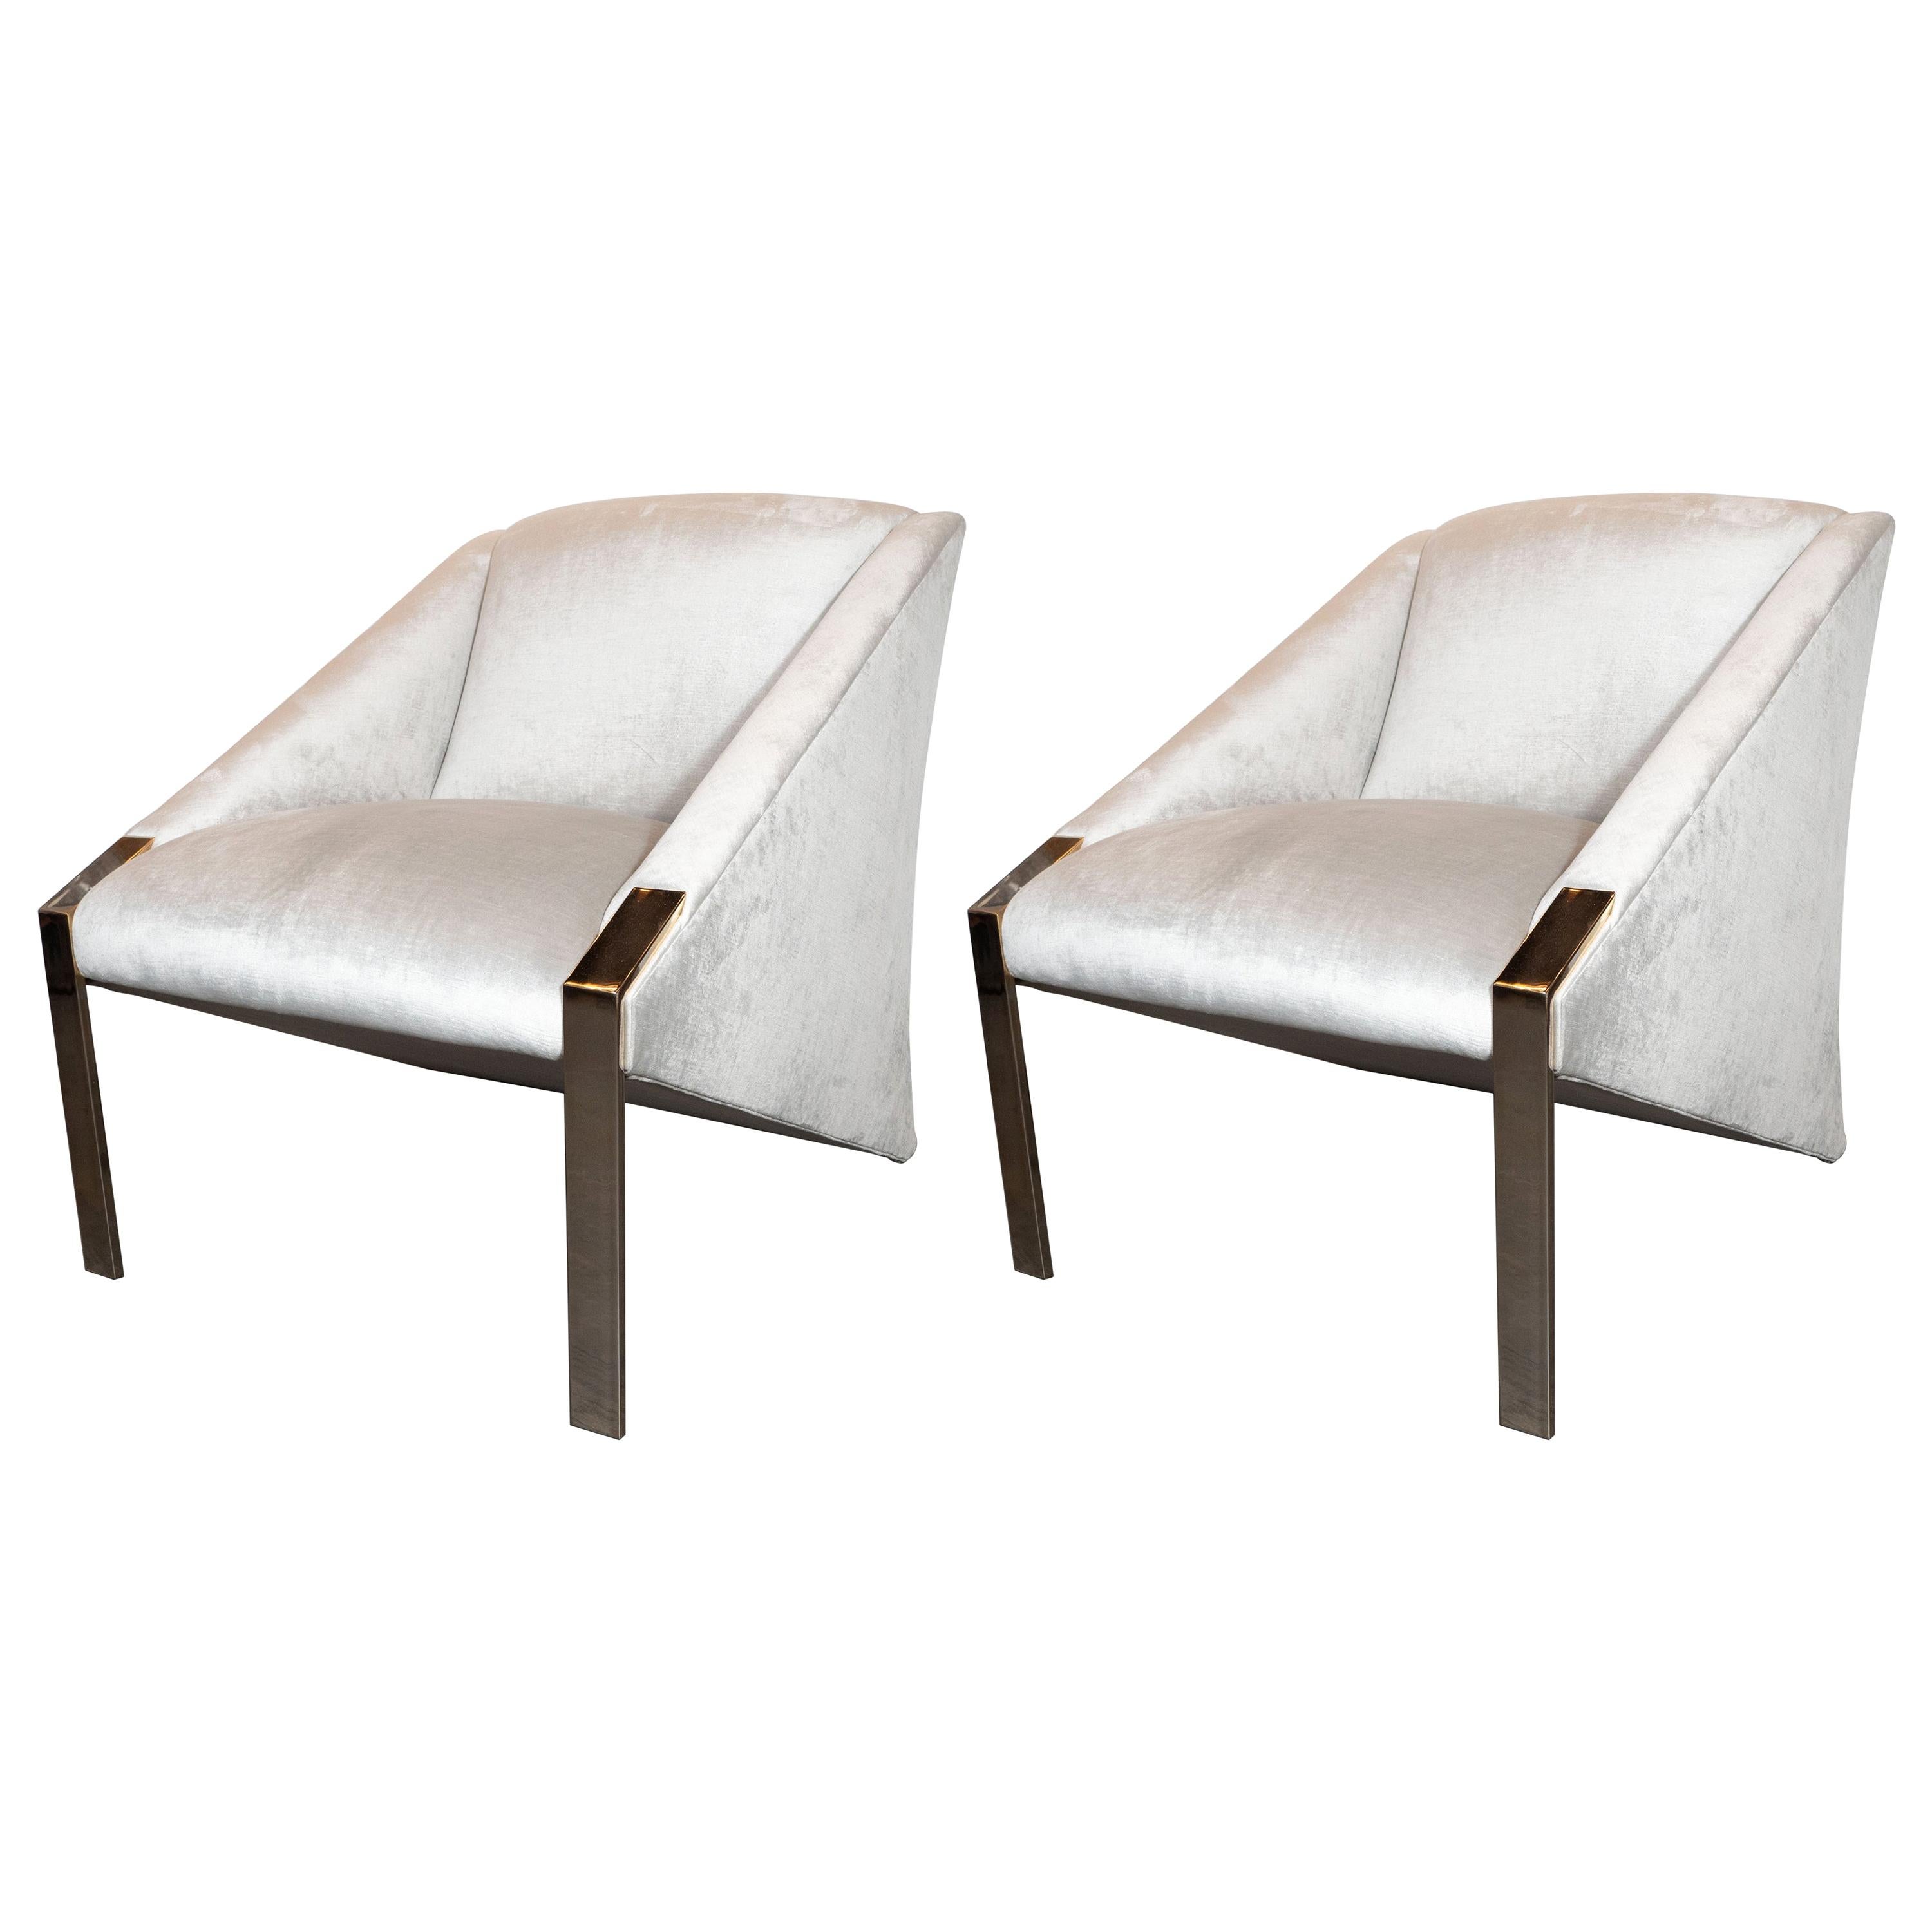 French Mid-Century Modern Lounge Chairs in Platinum Velvet by Andrée Putman